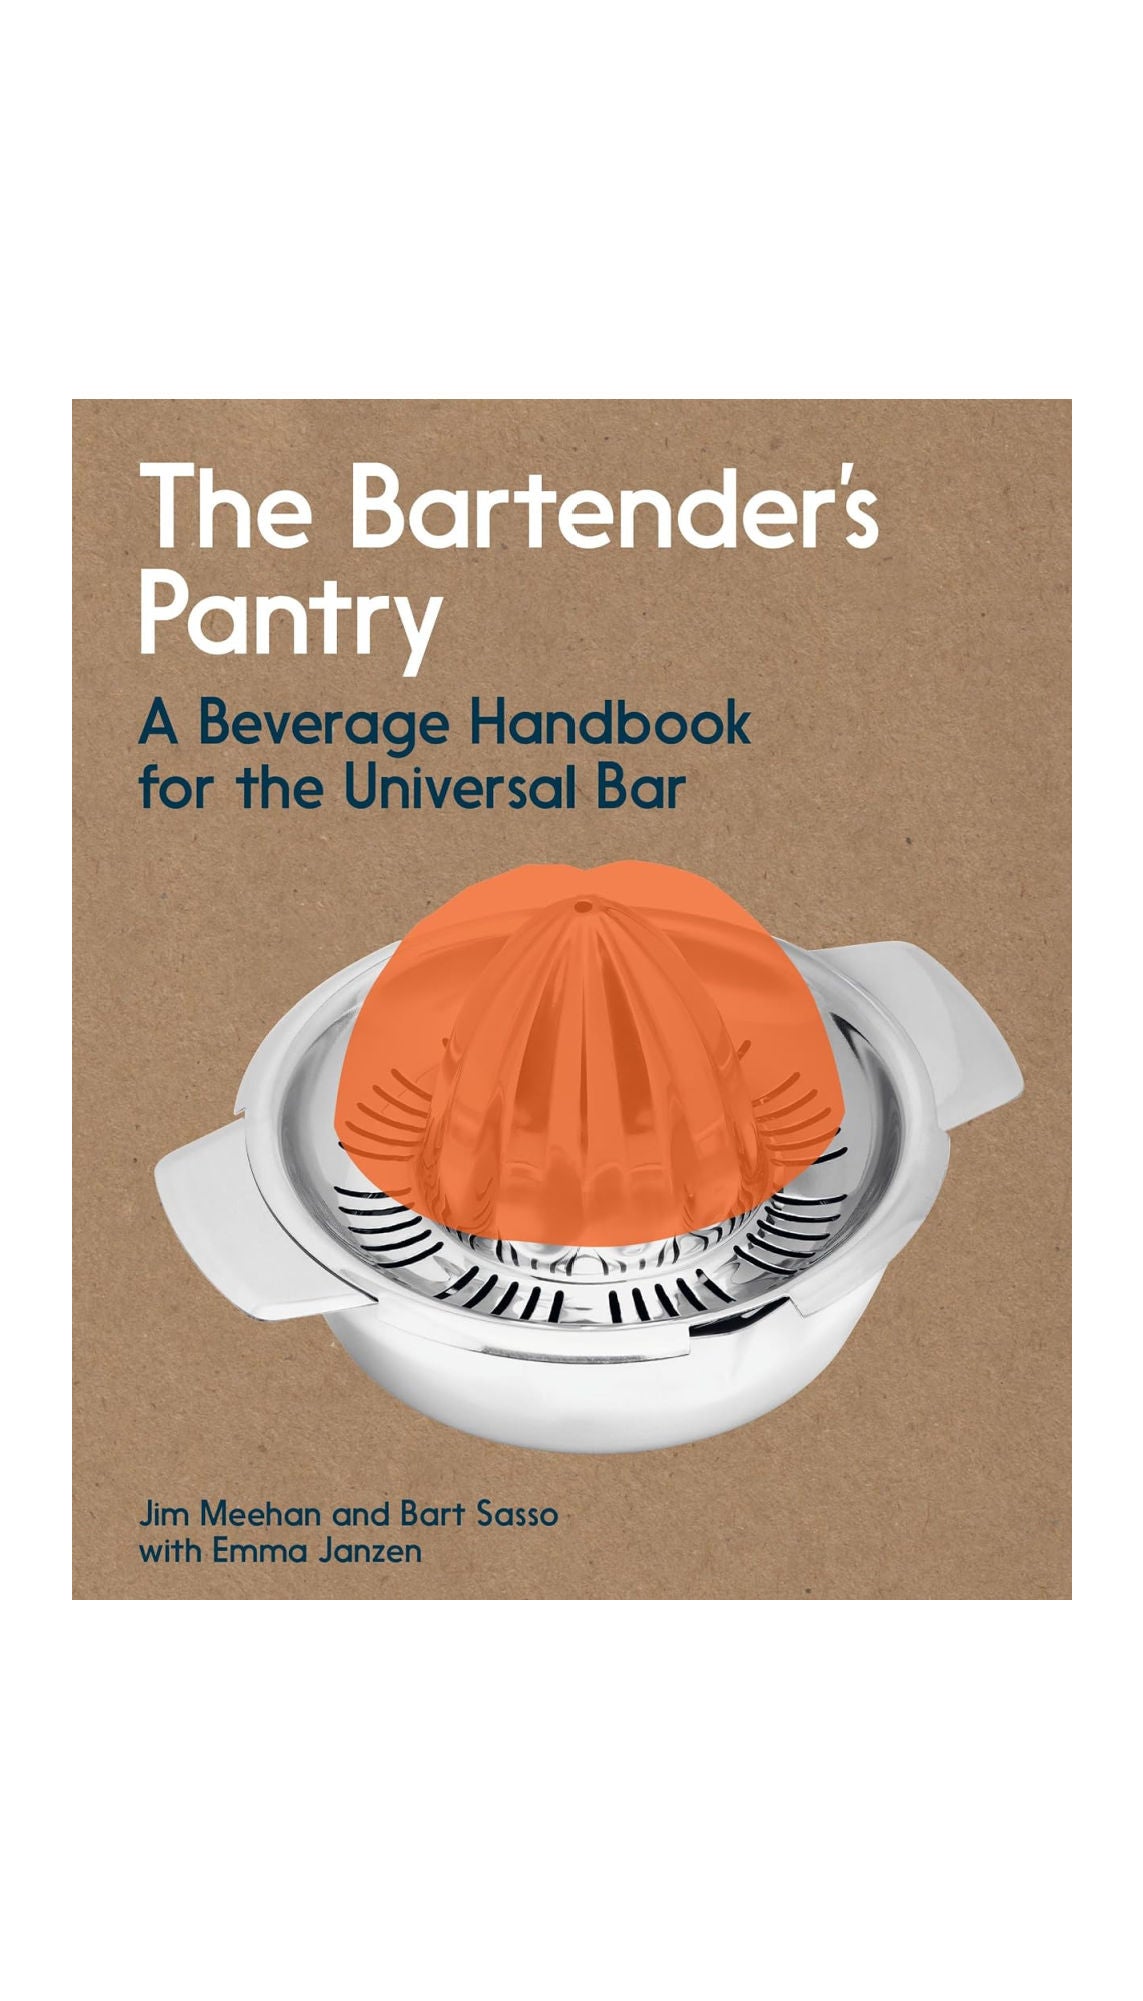 The Bartender's Pantry / COMING JUNE 11TH!